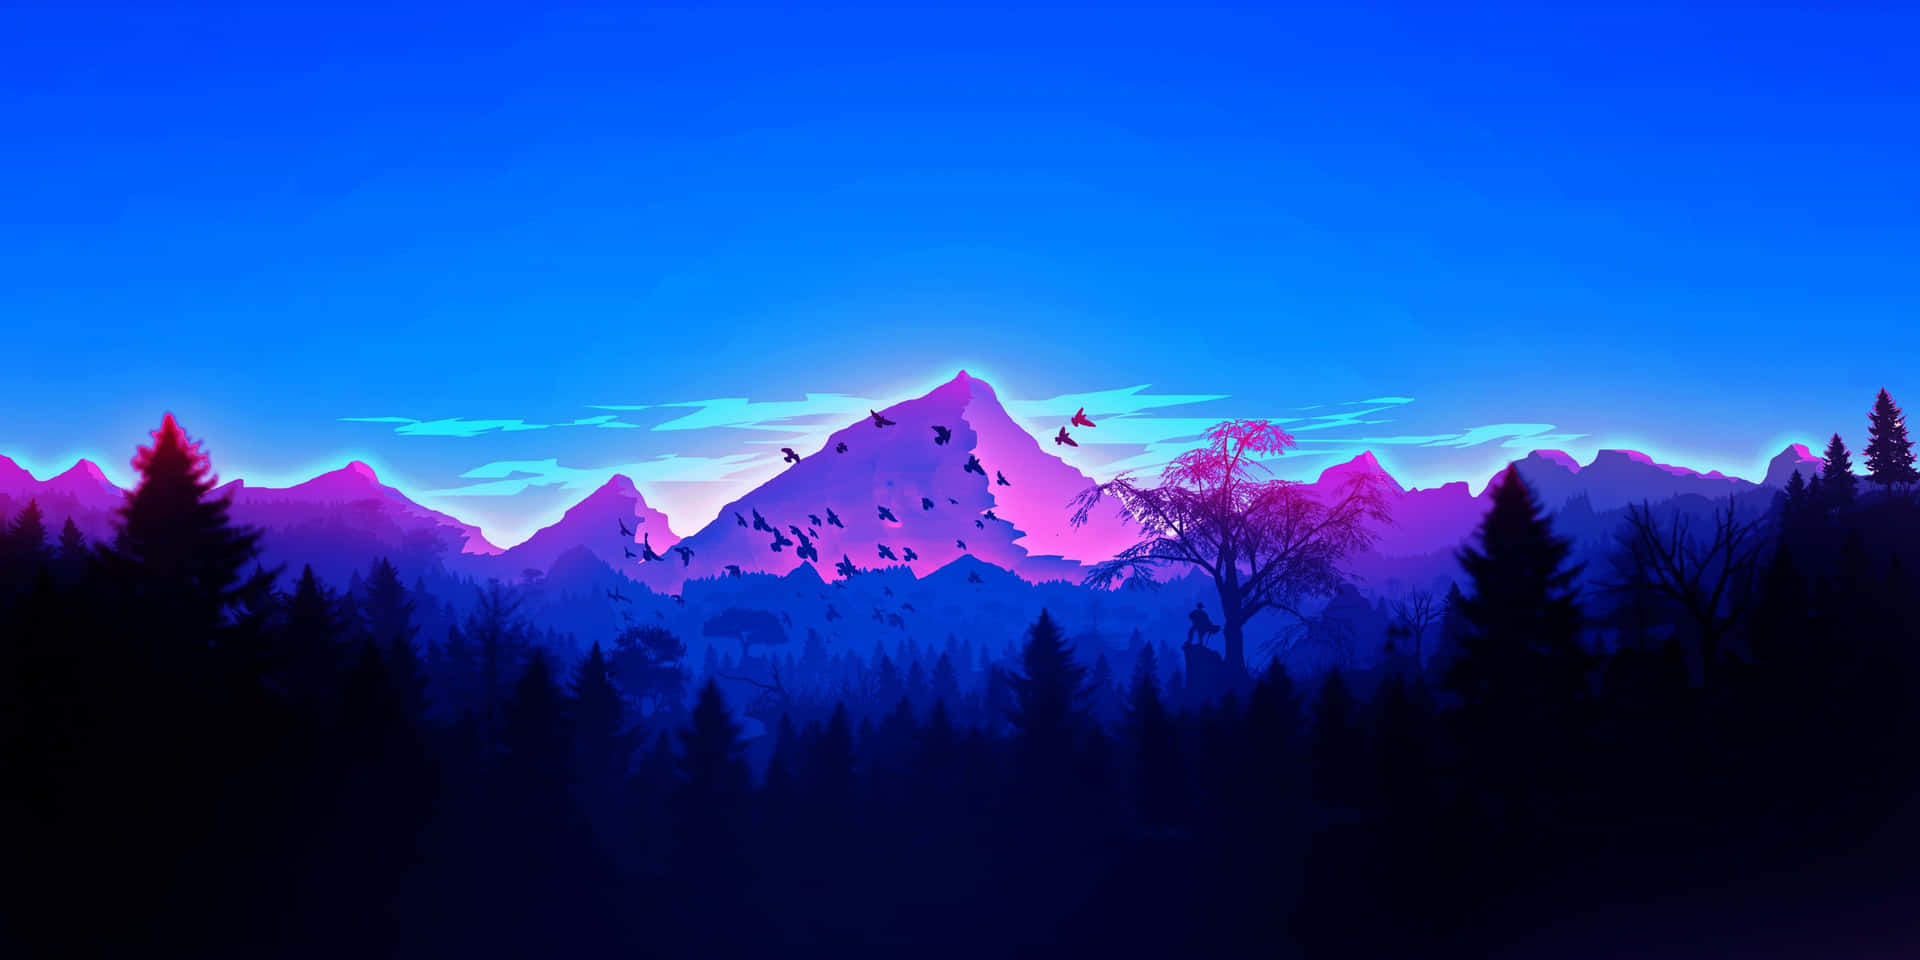 Blue Mountain With A Flock Of Birds Wallpaper